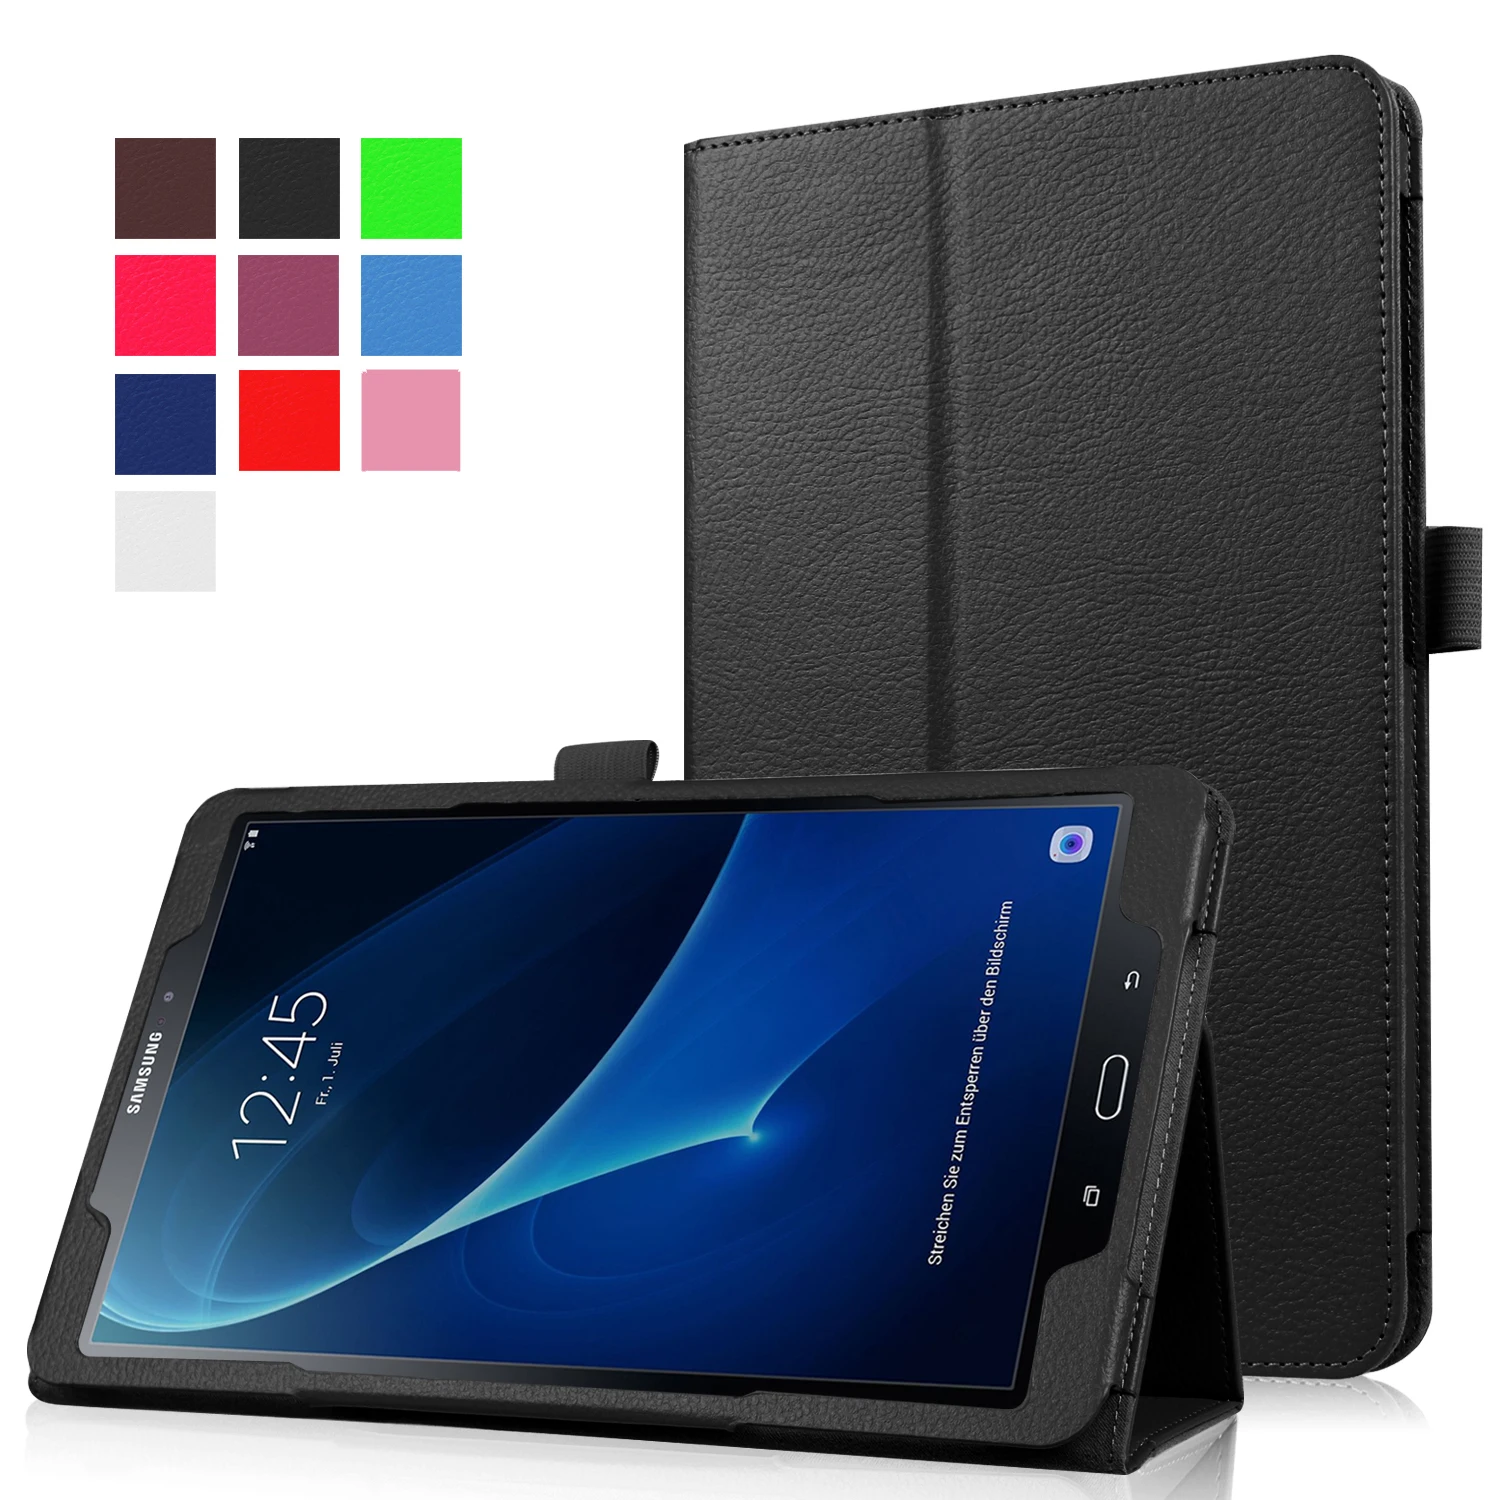 Folio stand cover case For Samsung Galaxy Tab A 10.1 T580 T585 Tablet case Protective shellin